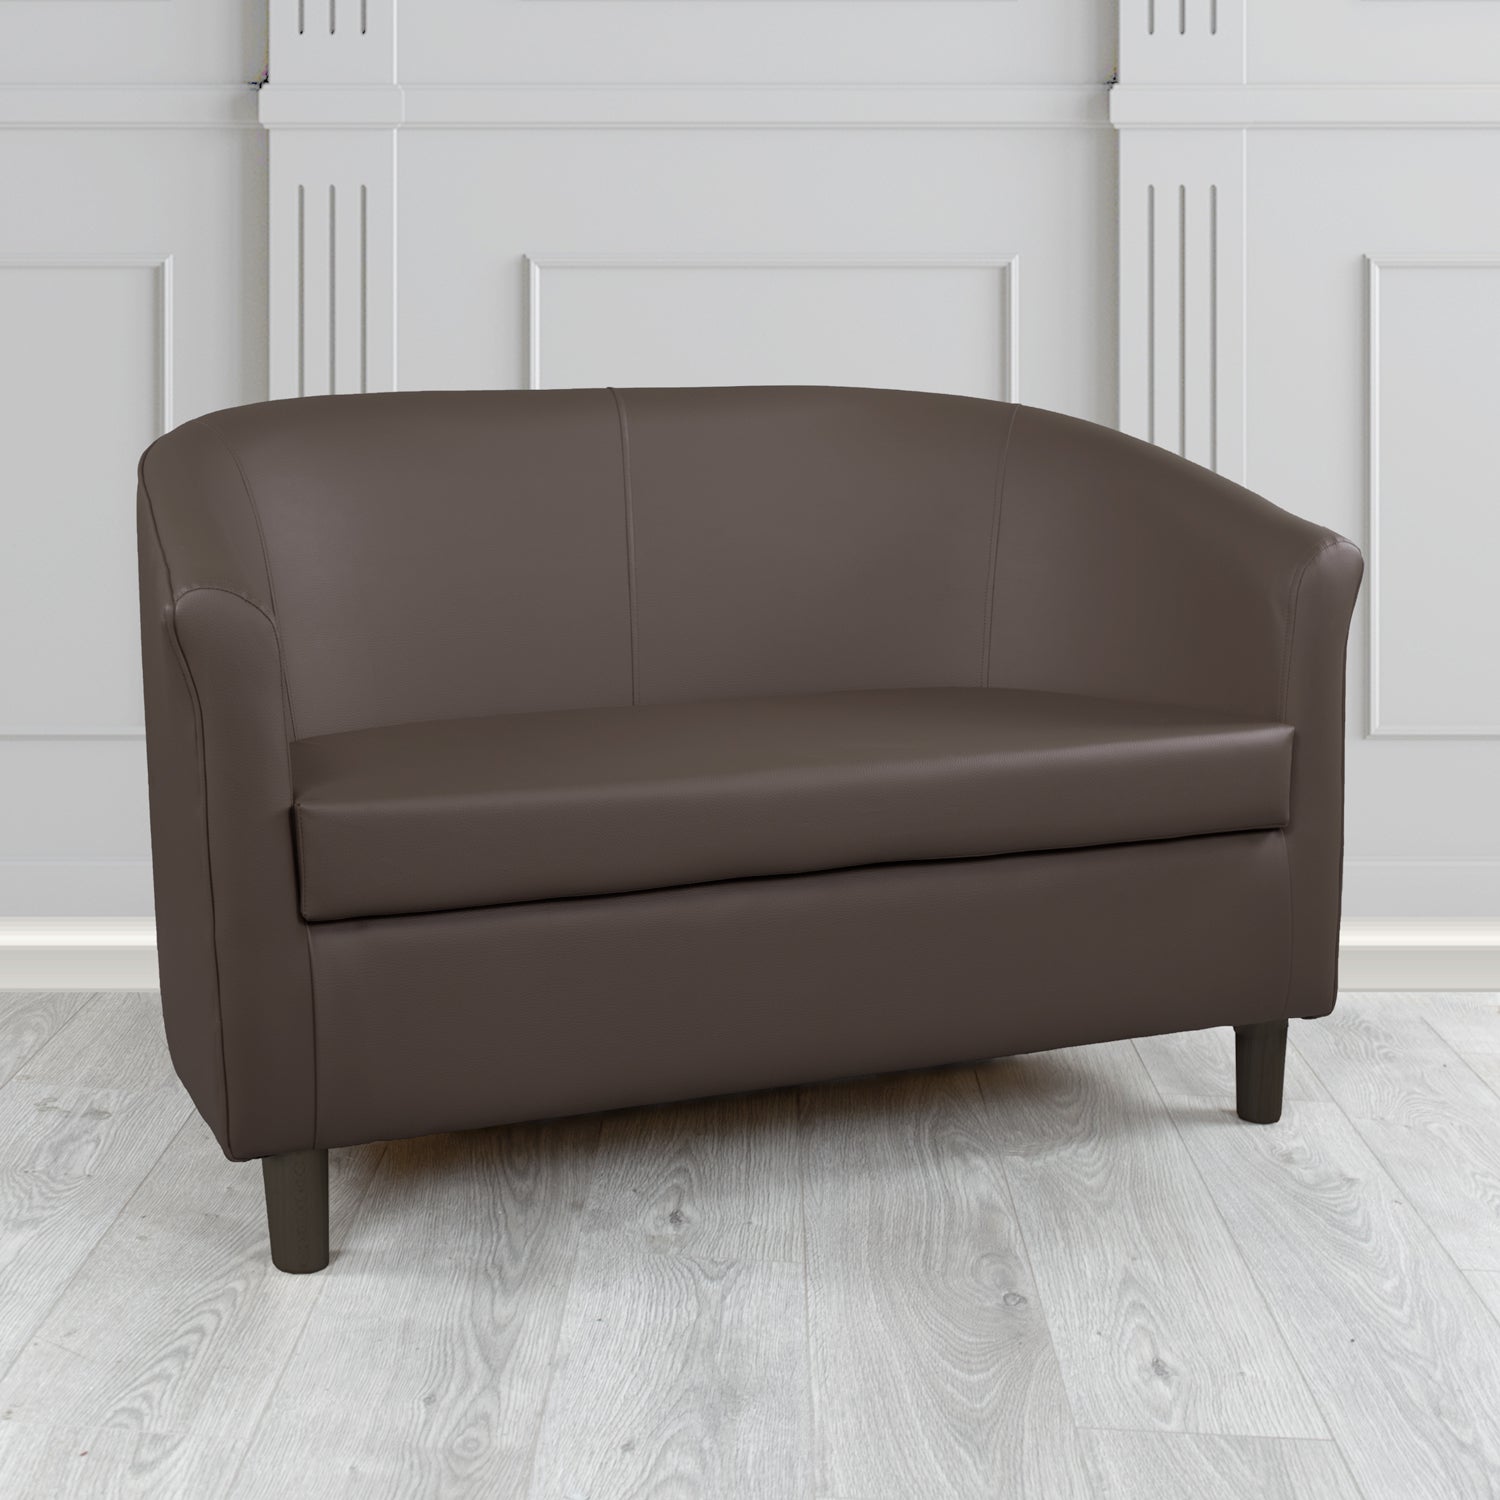 Tuscany 2 Seater Tub Sofa in Madrid Chocolate Faux Leather - The Tub Chair Shop